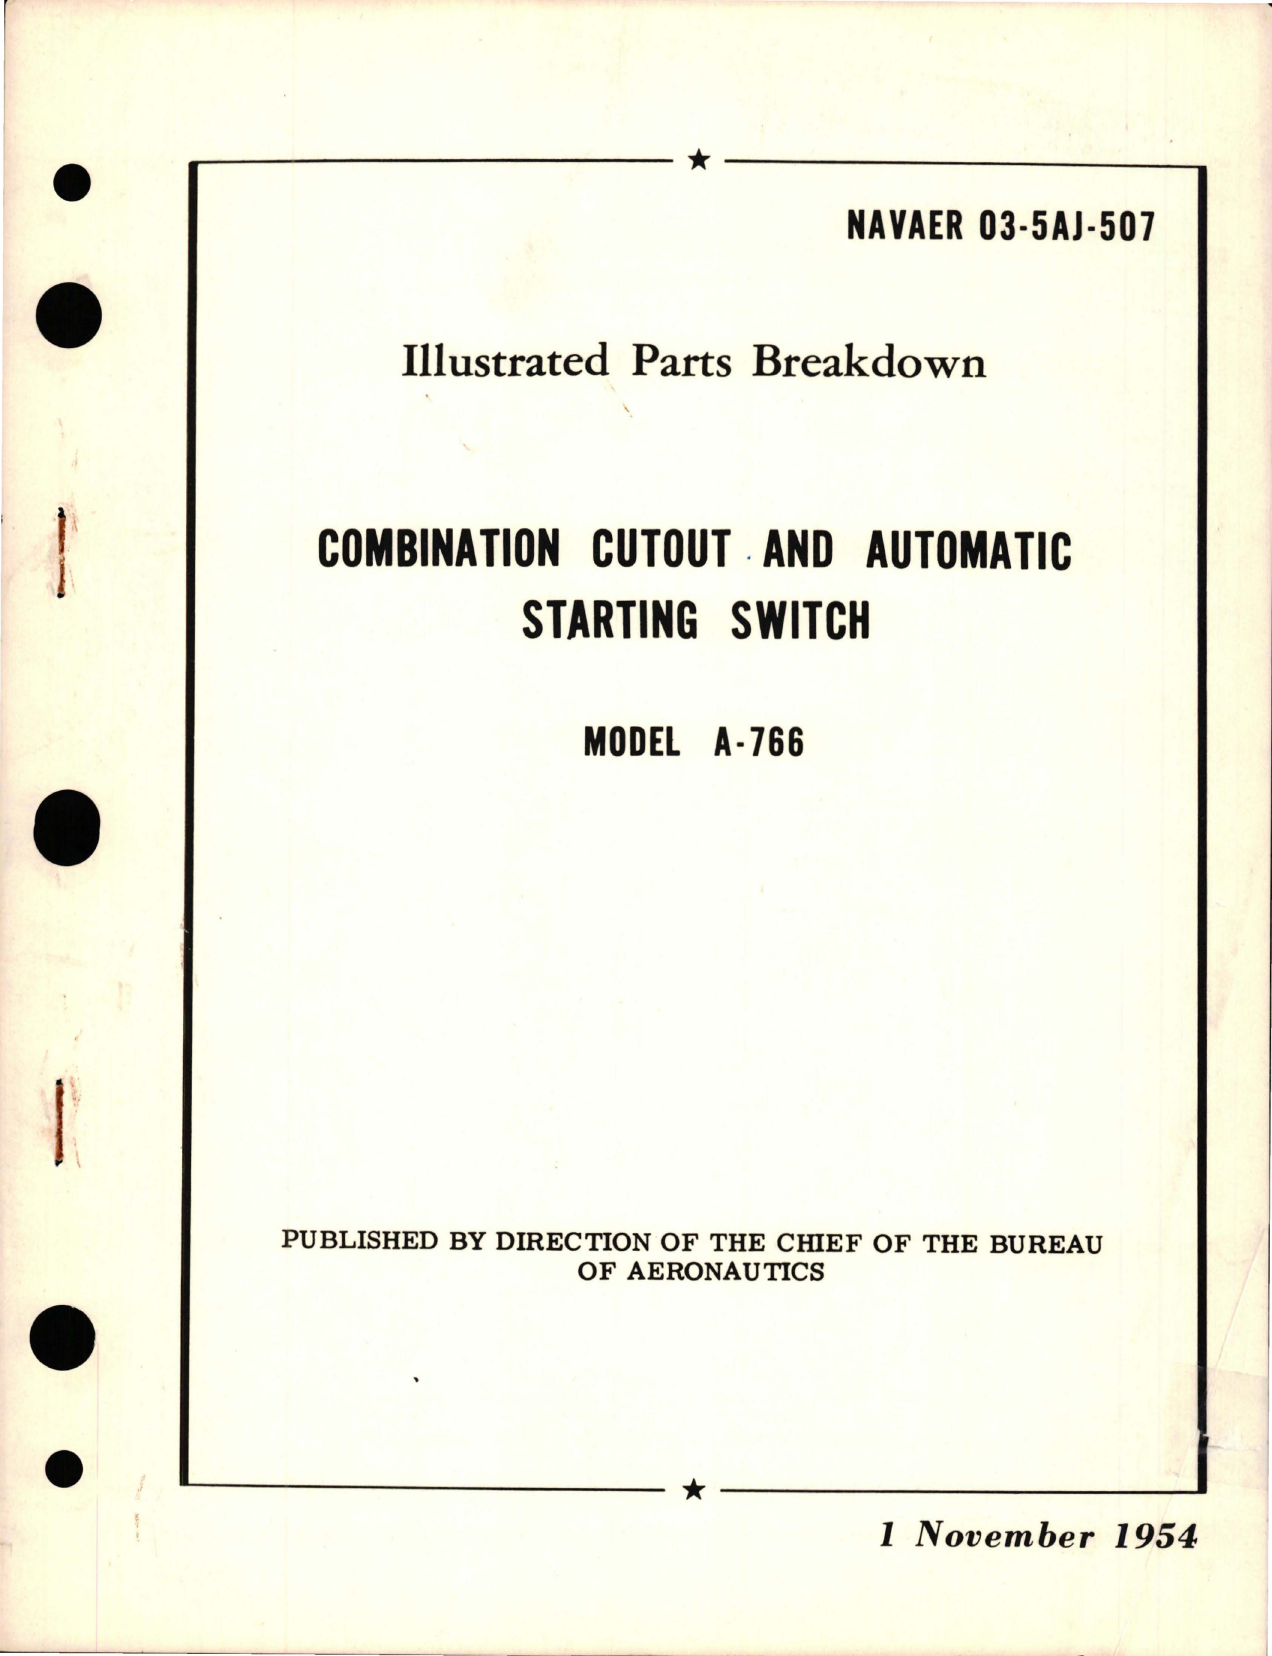 Sample page 1 from AirCorps Library document: Illustrated Parts Breakdown for Combination Cutout and Automatic Starting Switch - Model A-766 